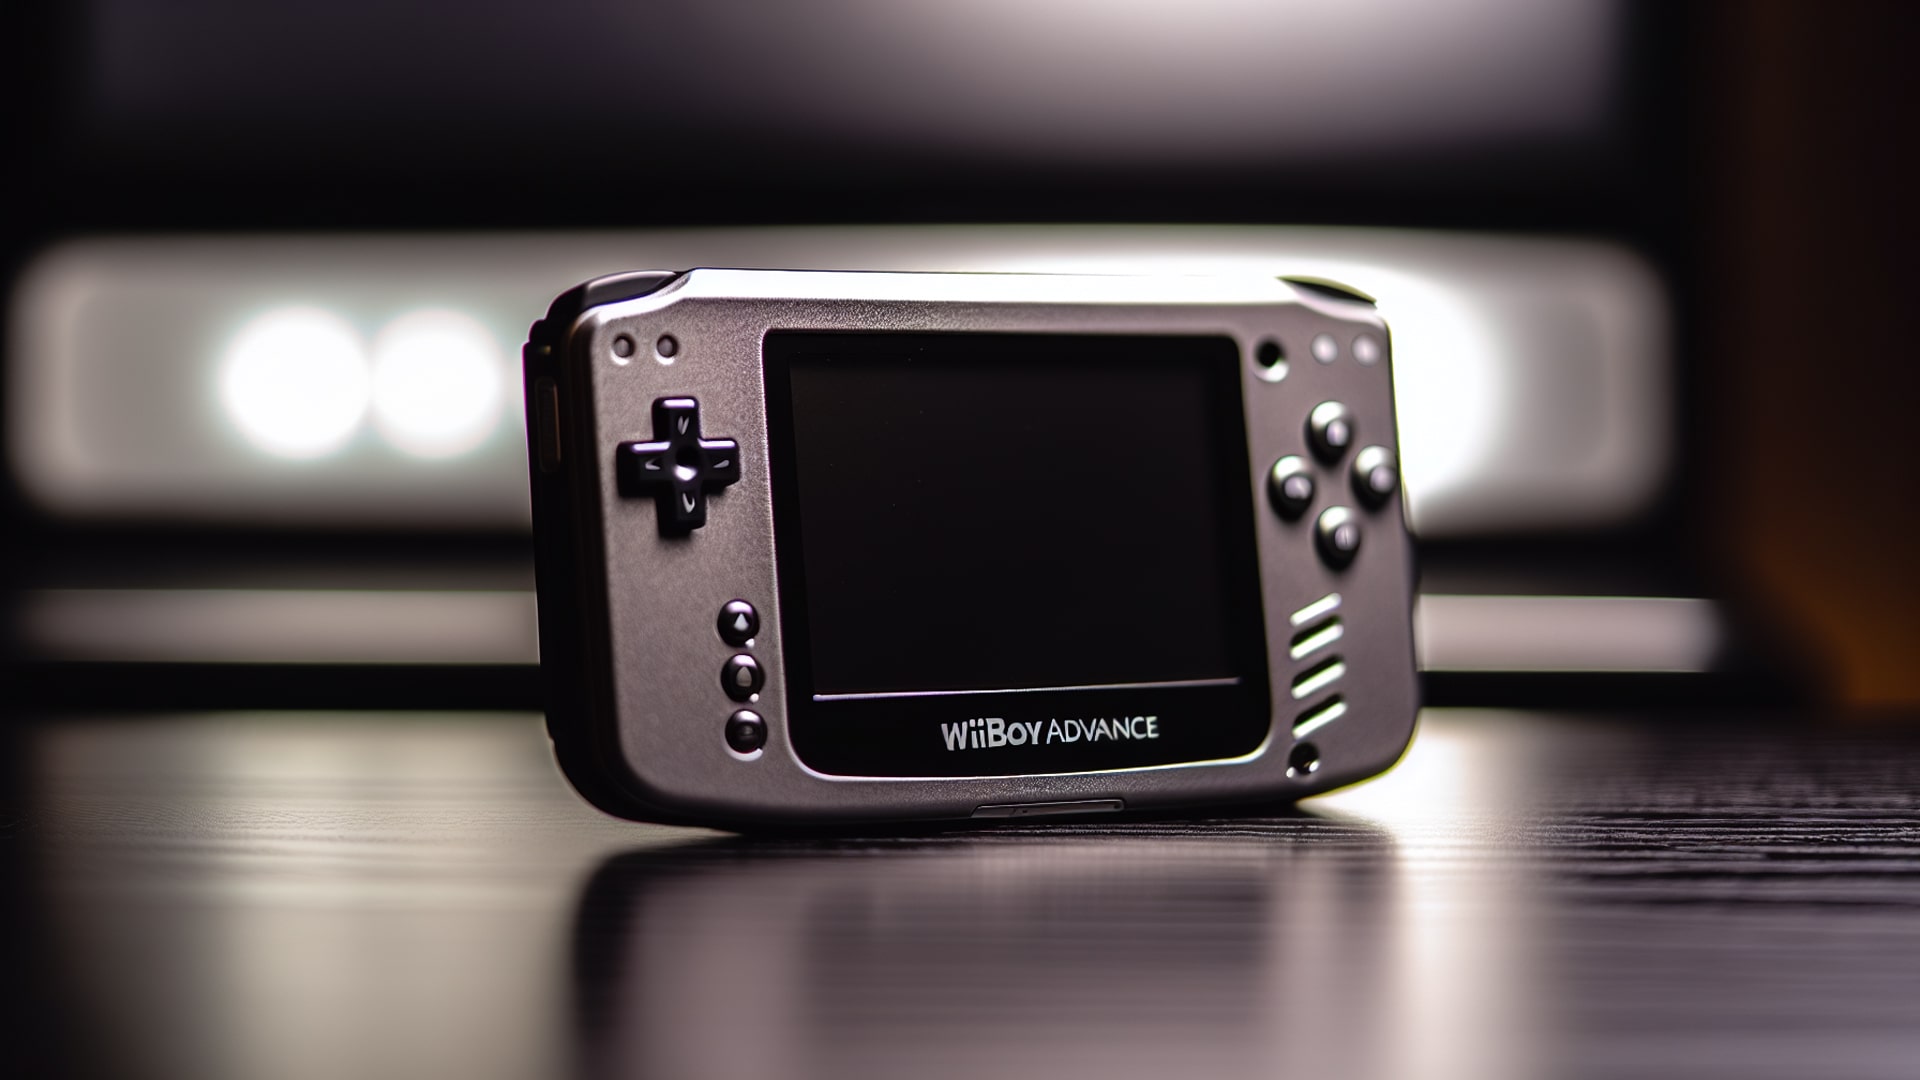 Sleek and portable Wiiboy Advance device, combining modern design with advanced gaming technology